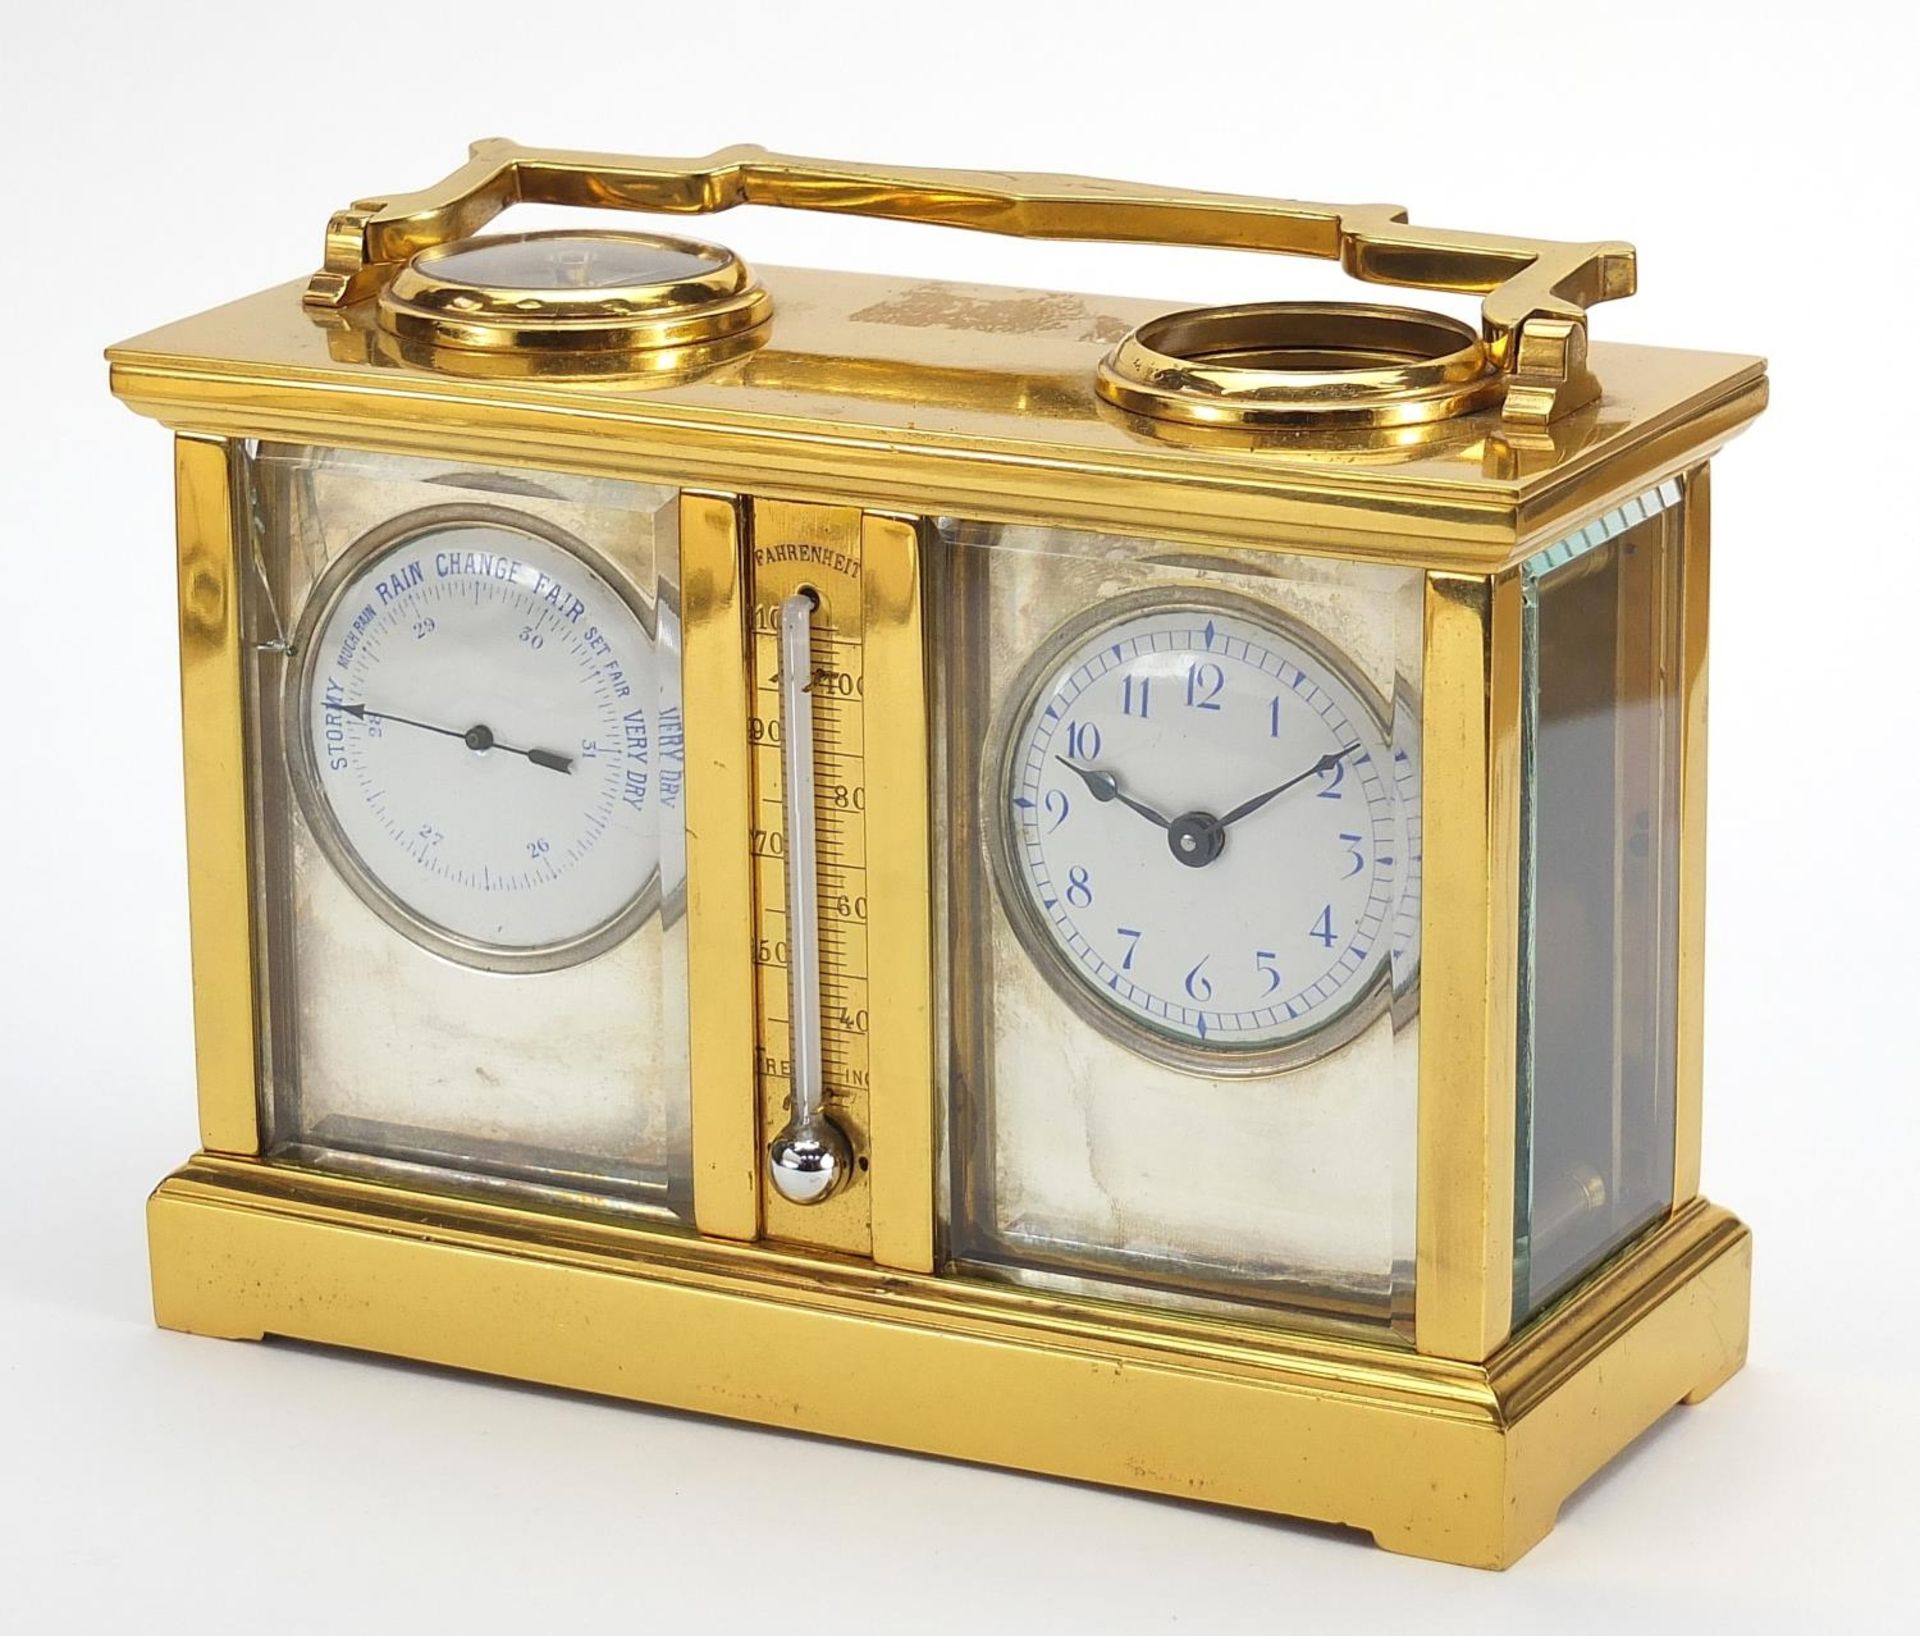 Brass cased travelling timepiece with barometer, clock, thermometer and compass, the barometer and